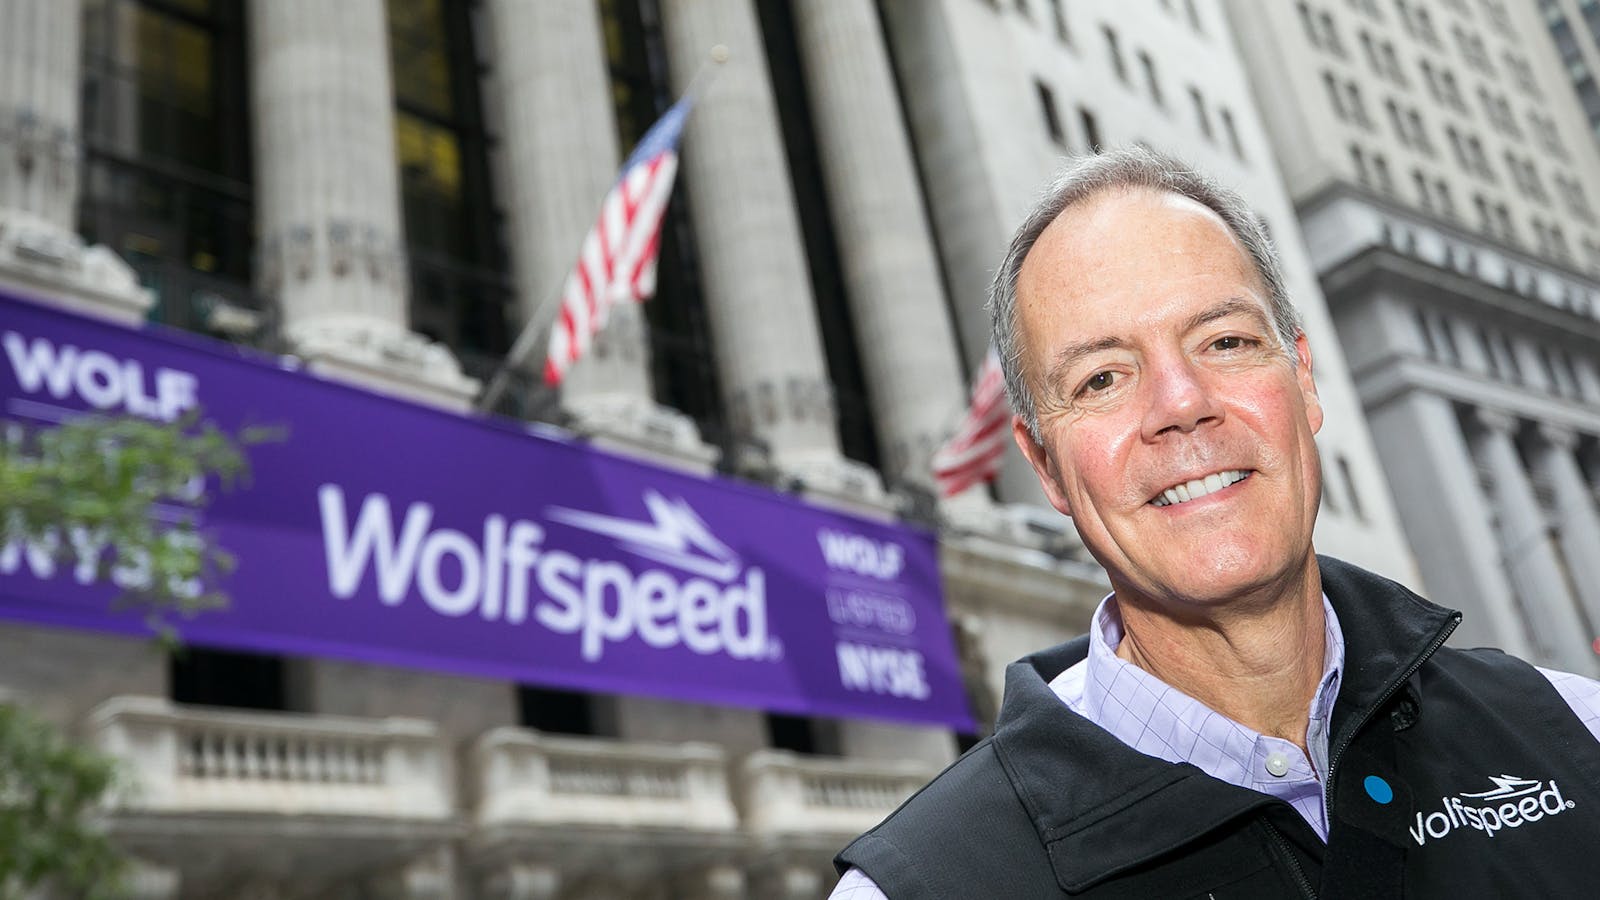 Wolfspeed CEO Gregg Lowe sold two big divisions to focus the company on silicon carbide chips. Photo courtesy of Wolfspeed